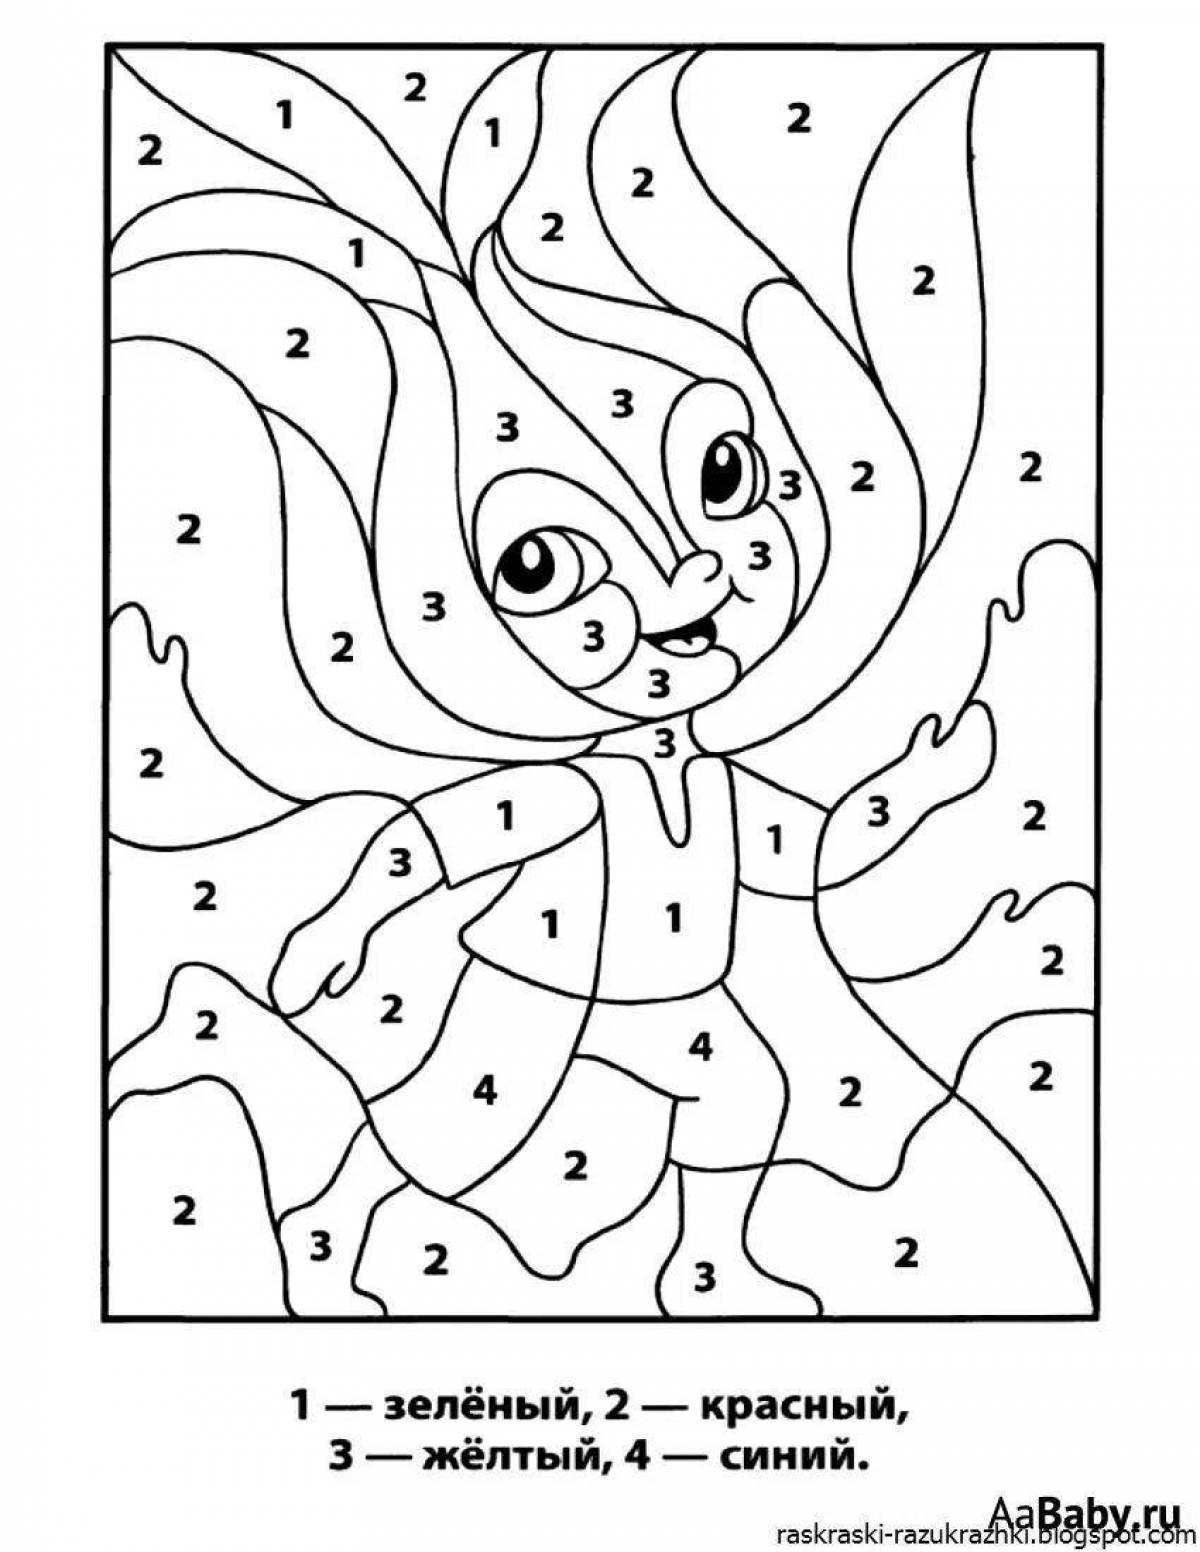 Fun coloring by numbers up to 10 for preschoolers